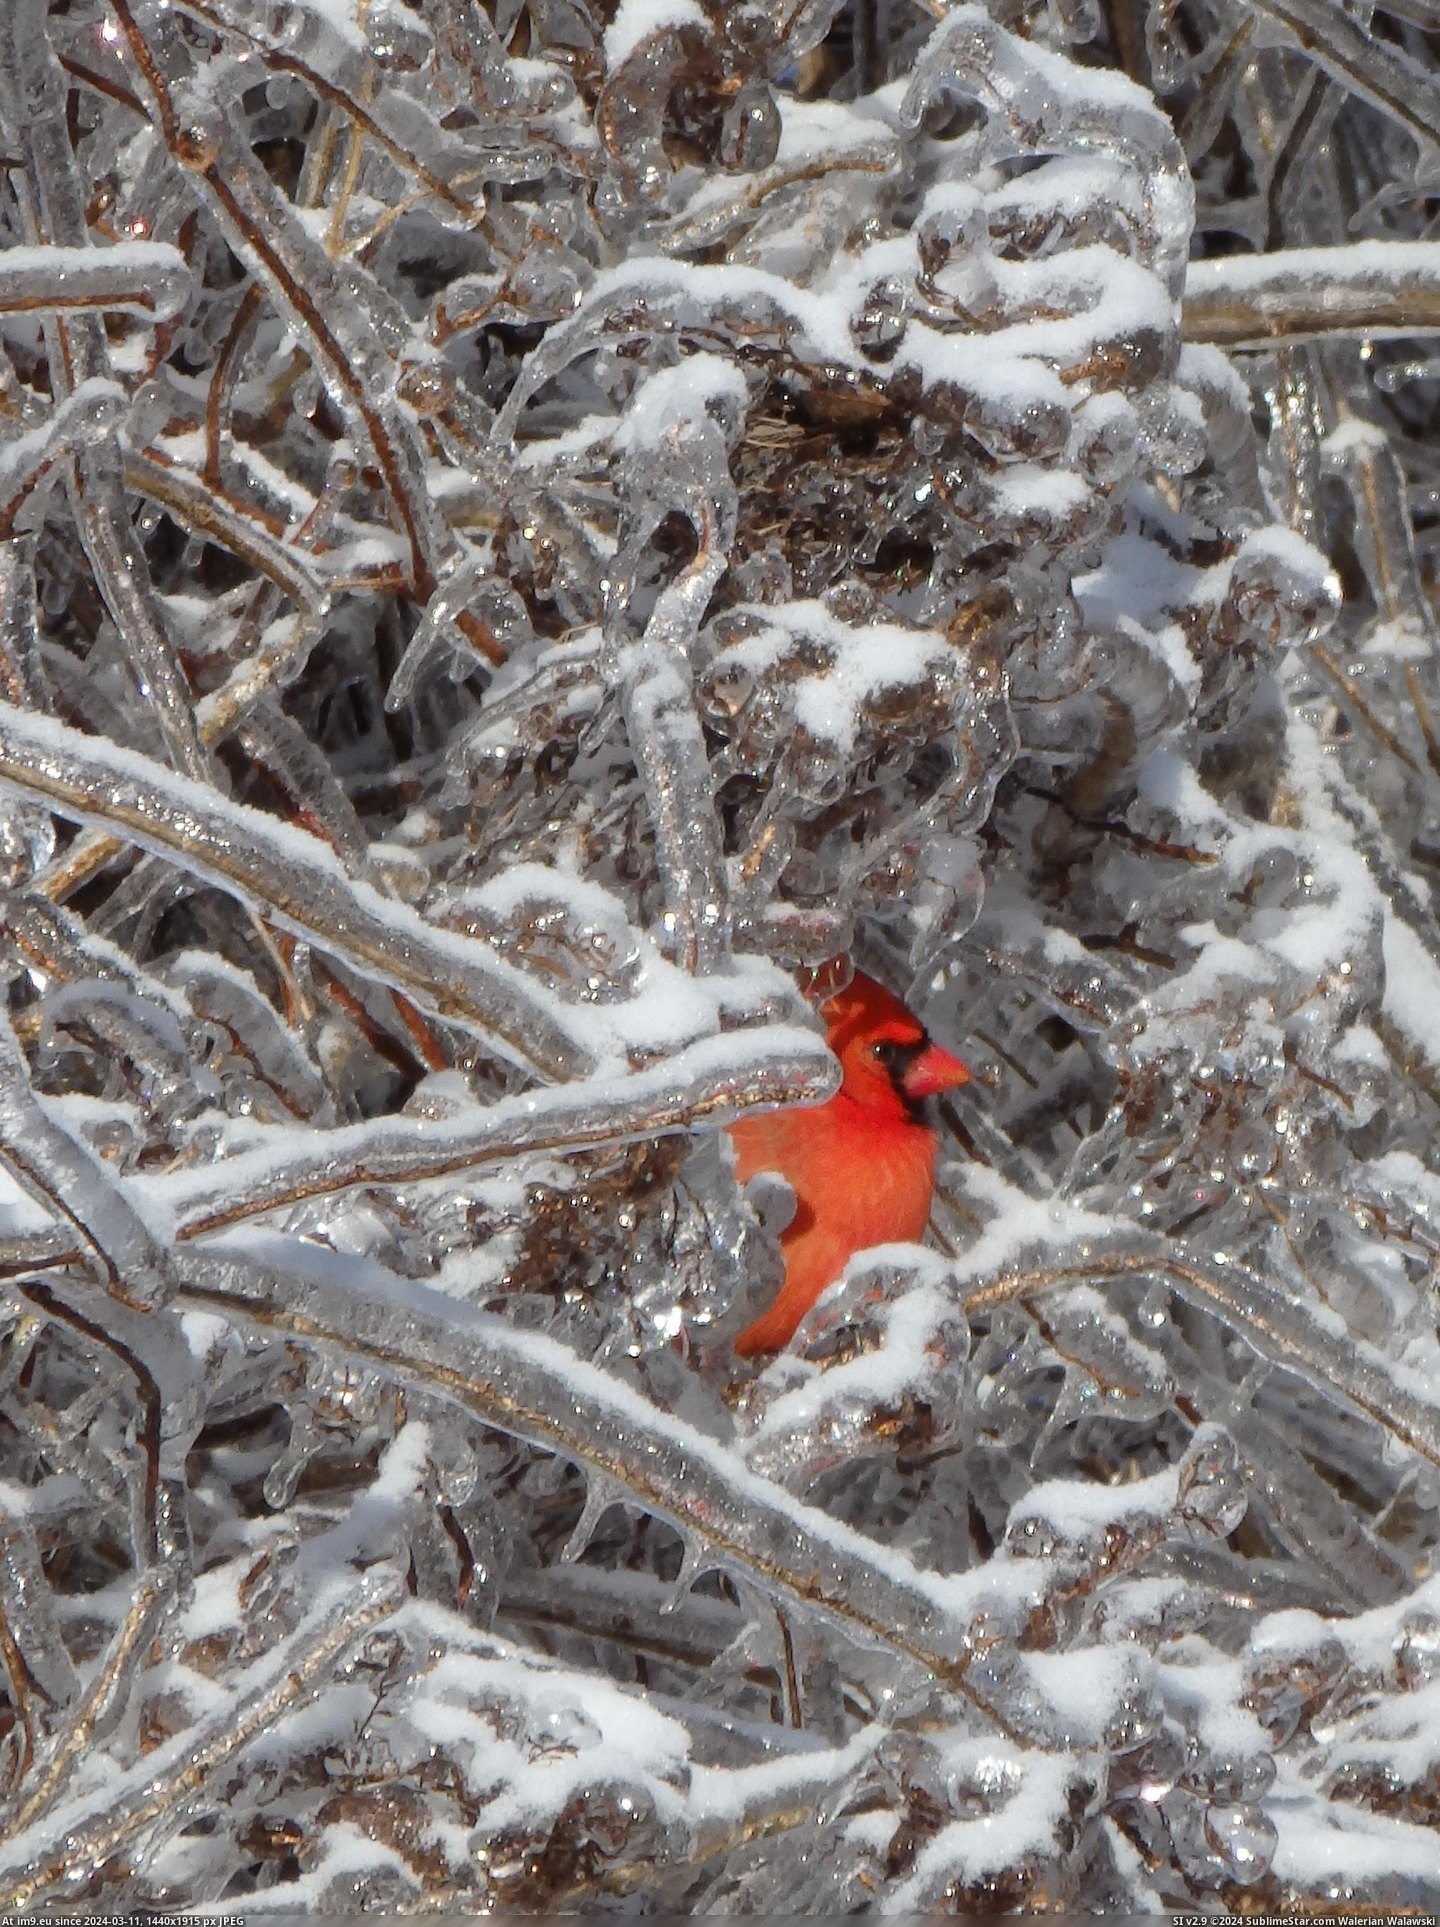 #Ice #Appeared #Cardinal #Storm [Pics] After the ice storm, a cardinal appeared (OC) Pic. (Изображение из альбом My r/PICS favs))